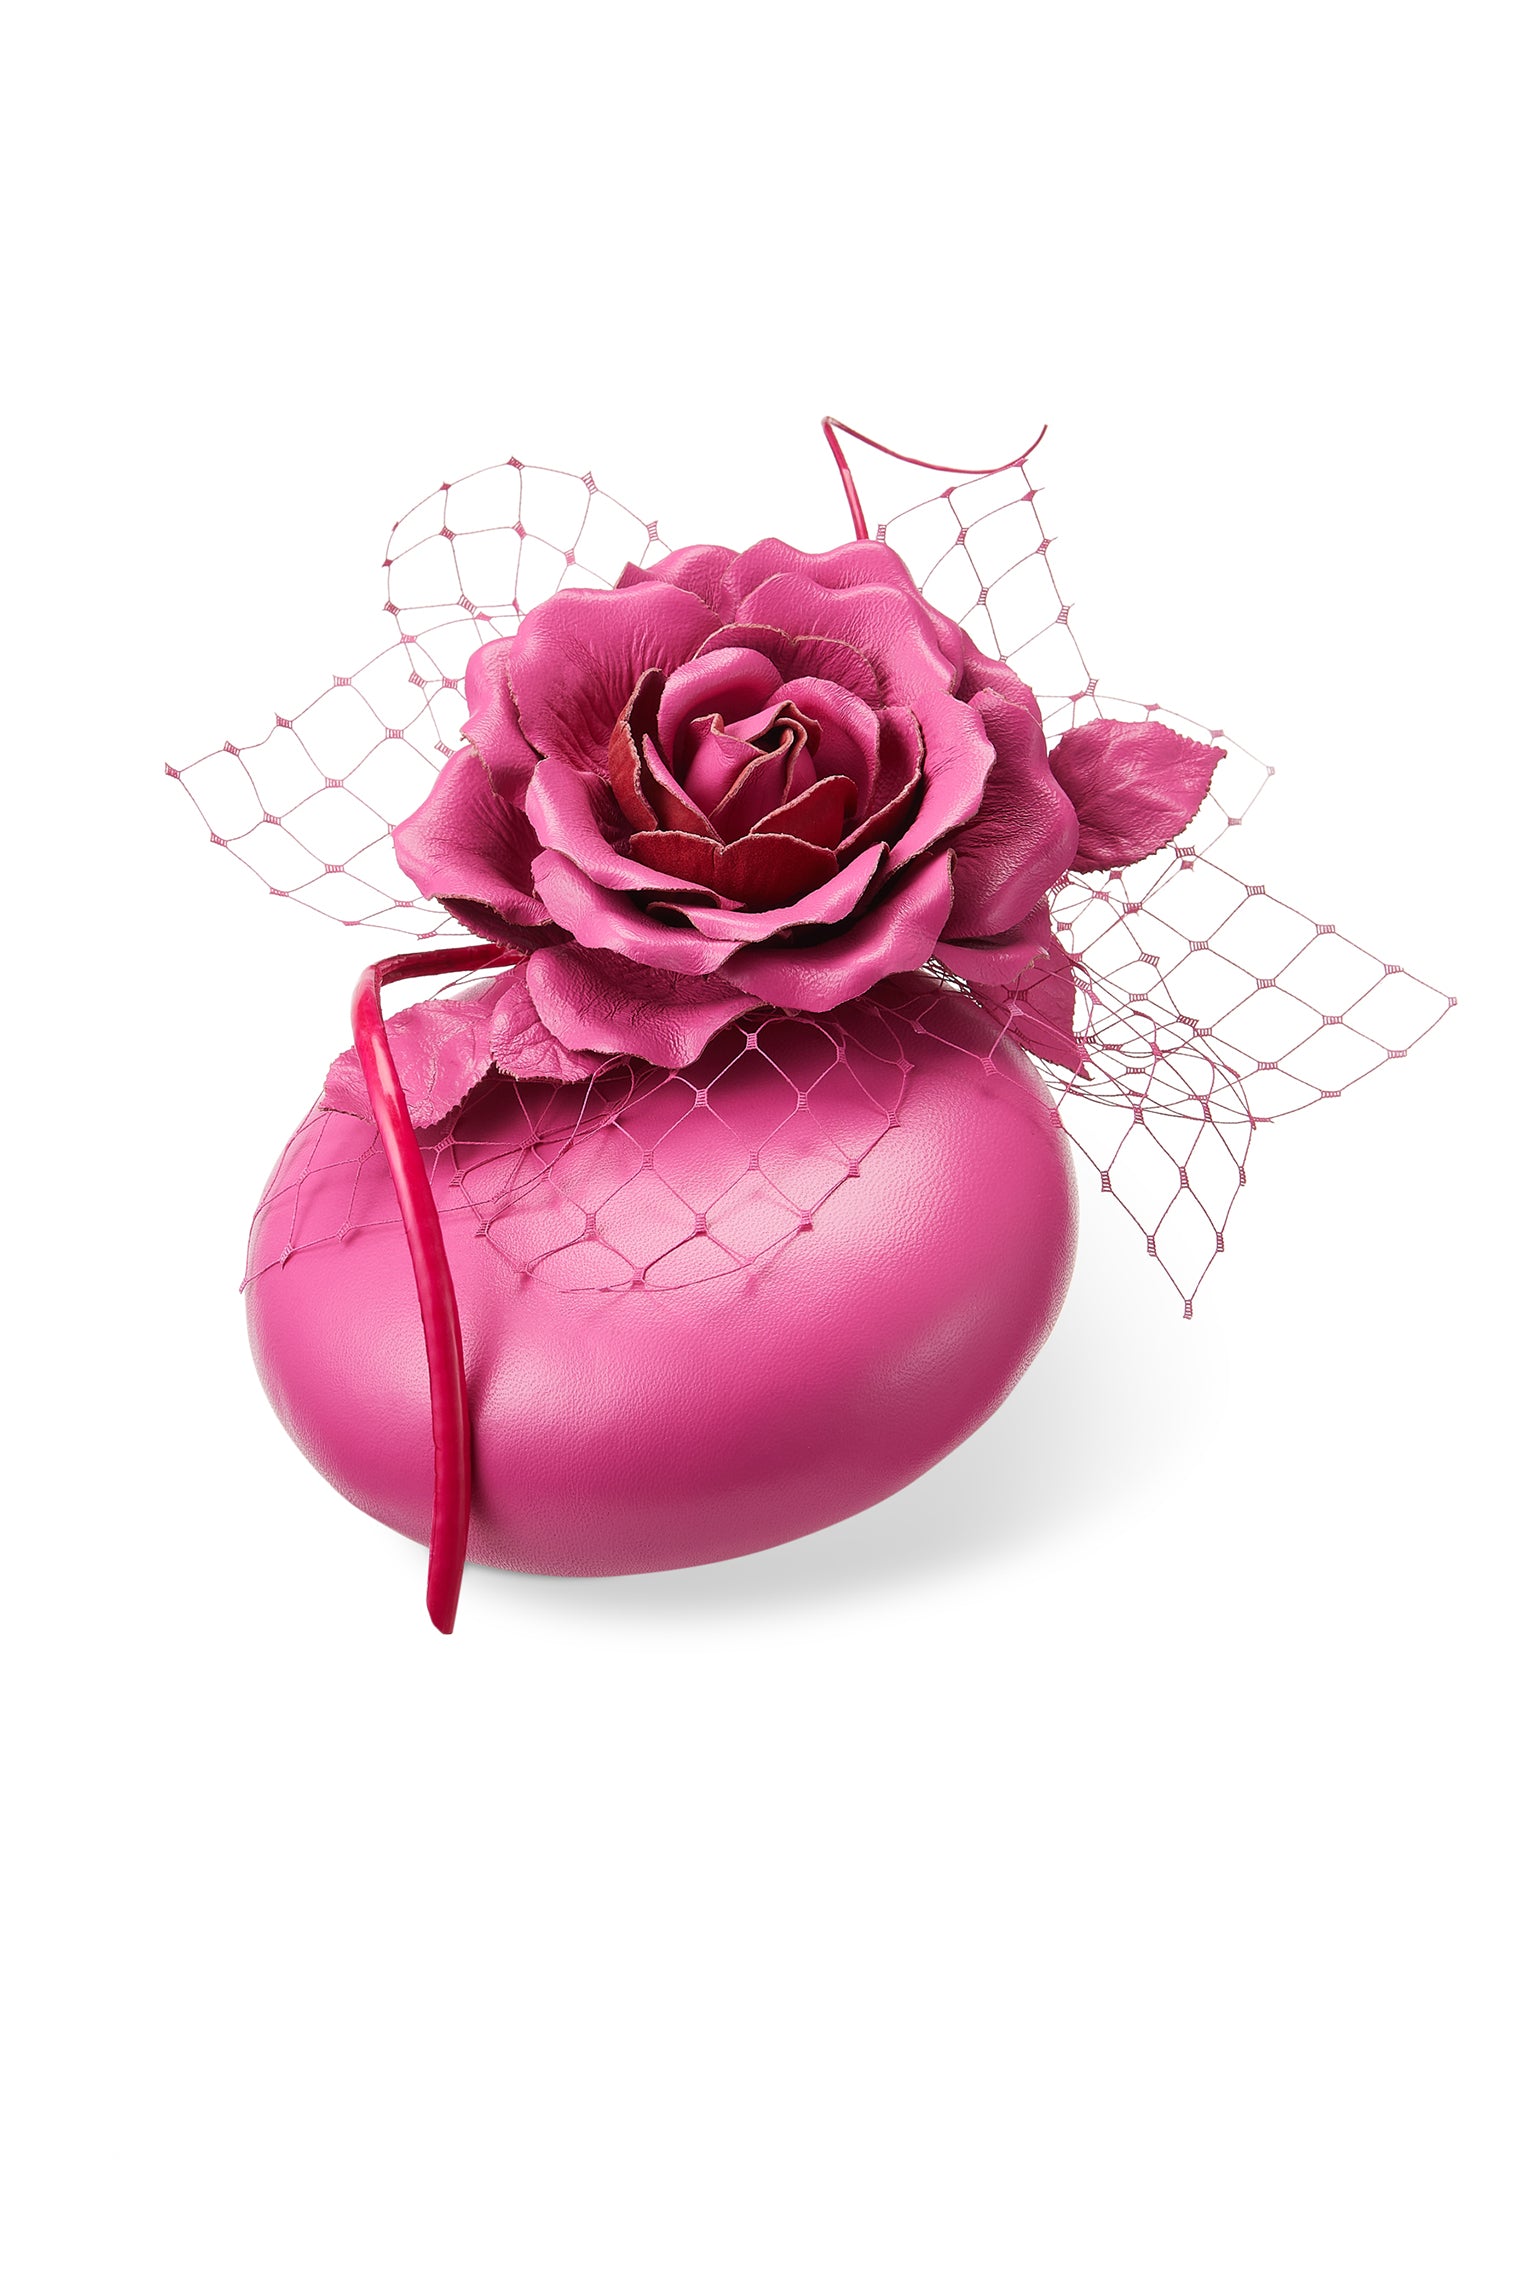 Rose Bud Pink Leather Percher Hat - Lock Couture by Awon Golding - Lock & Co. Hatters London UK